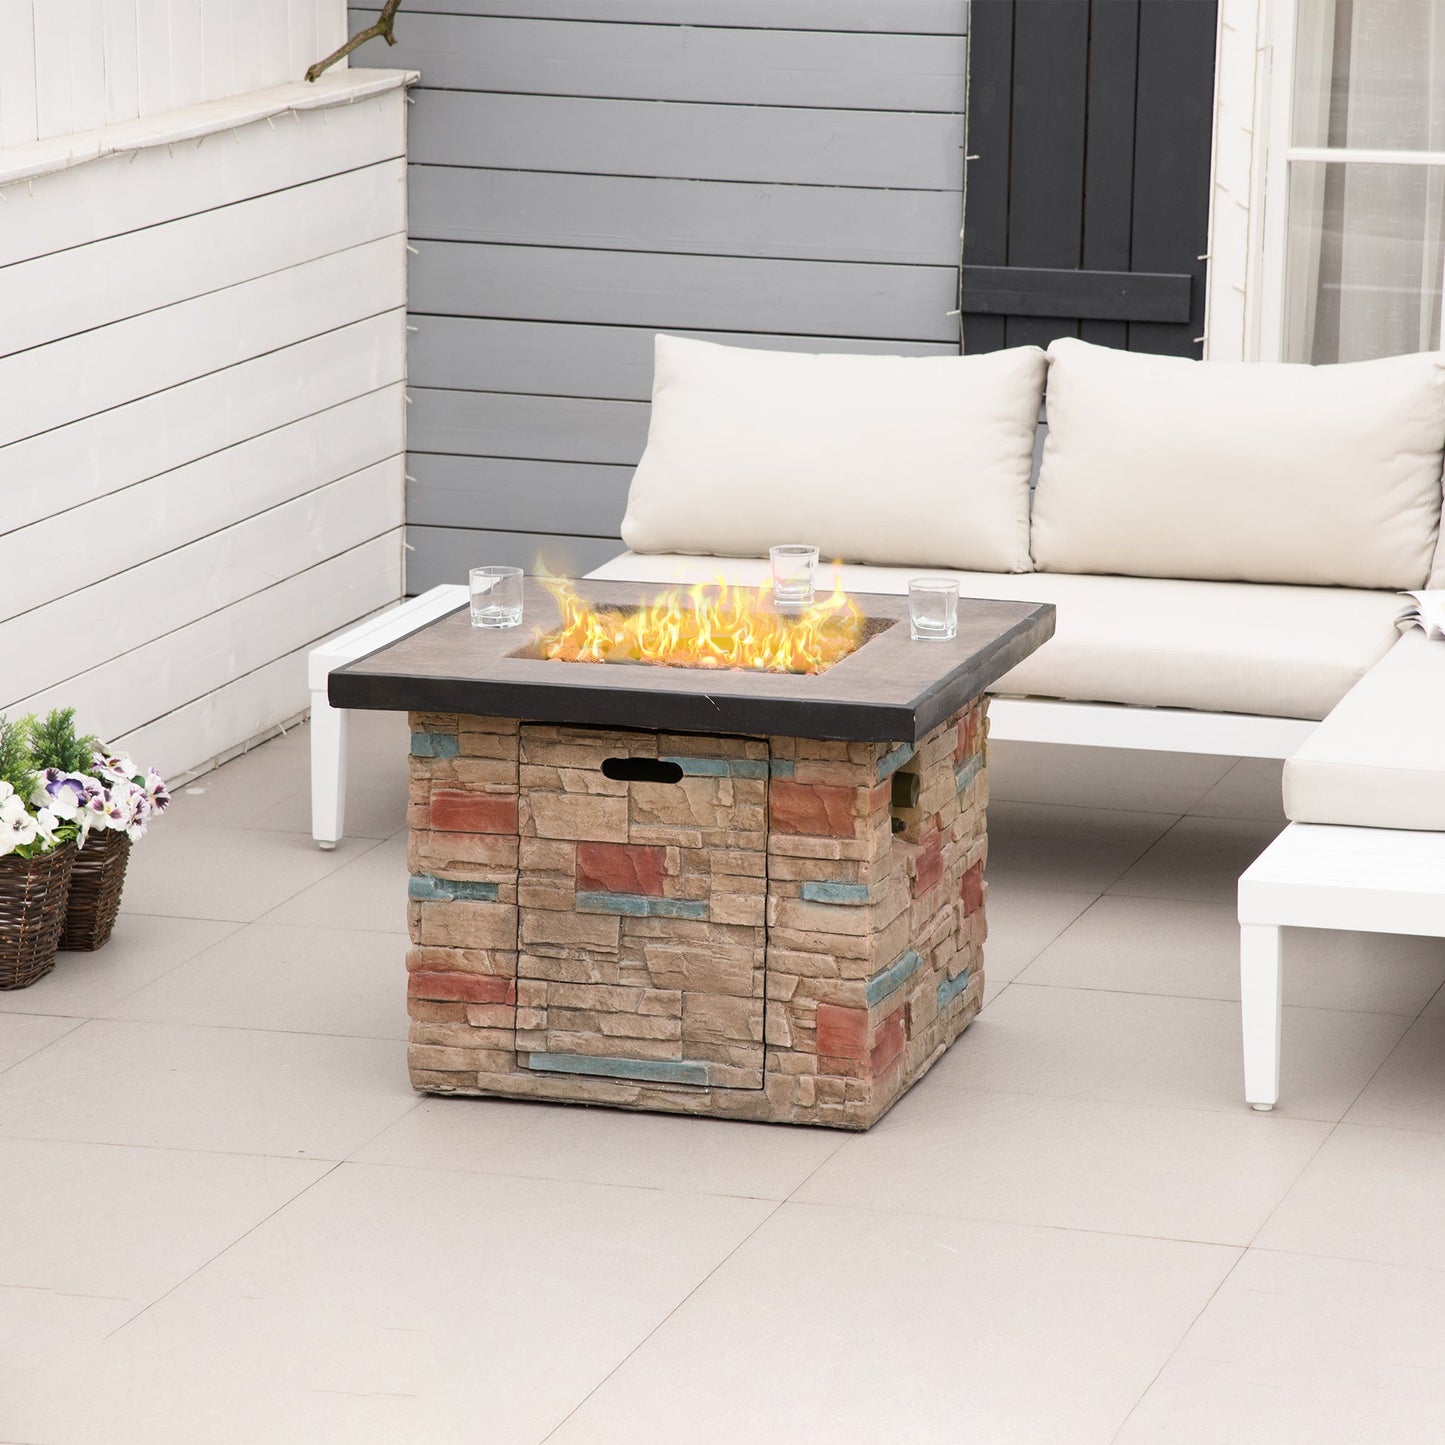 Outdoor and Garden-32 Inch Square Propane Fire Pit Table, 50,000BTU Gas Firepit with Protective Cover, Lava Rocks, CSA Certification for Outdoor, and Patio - Outdoor Style Company